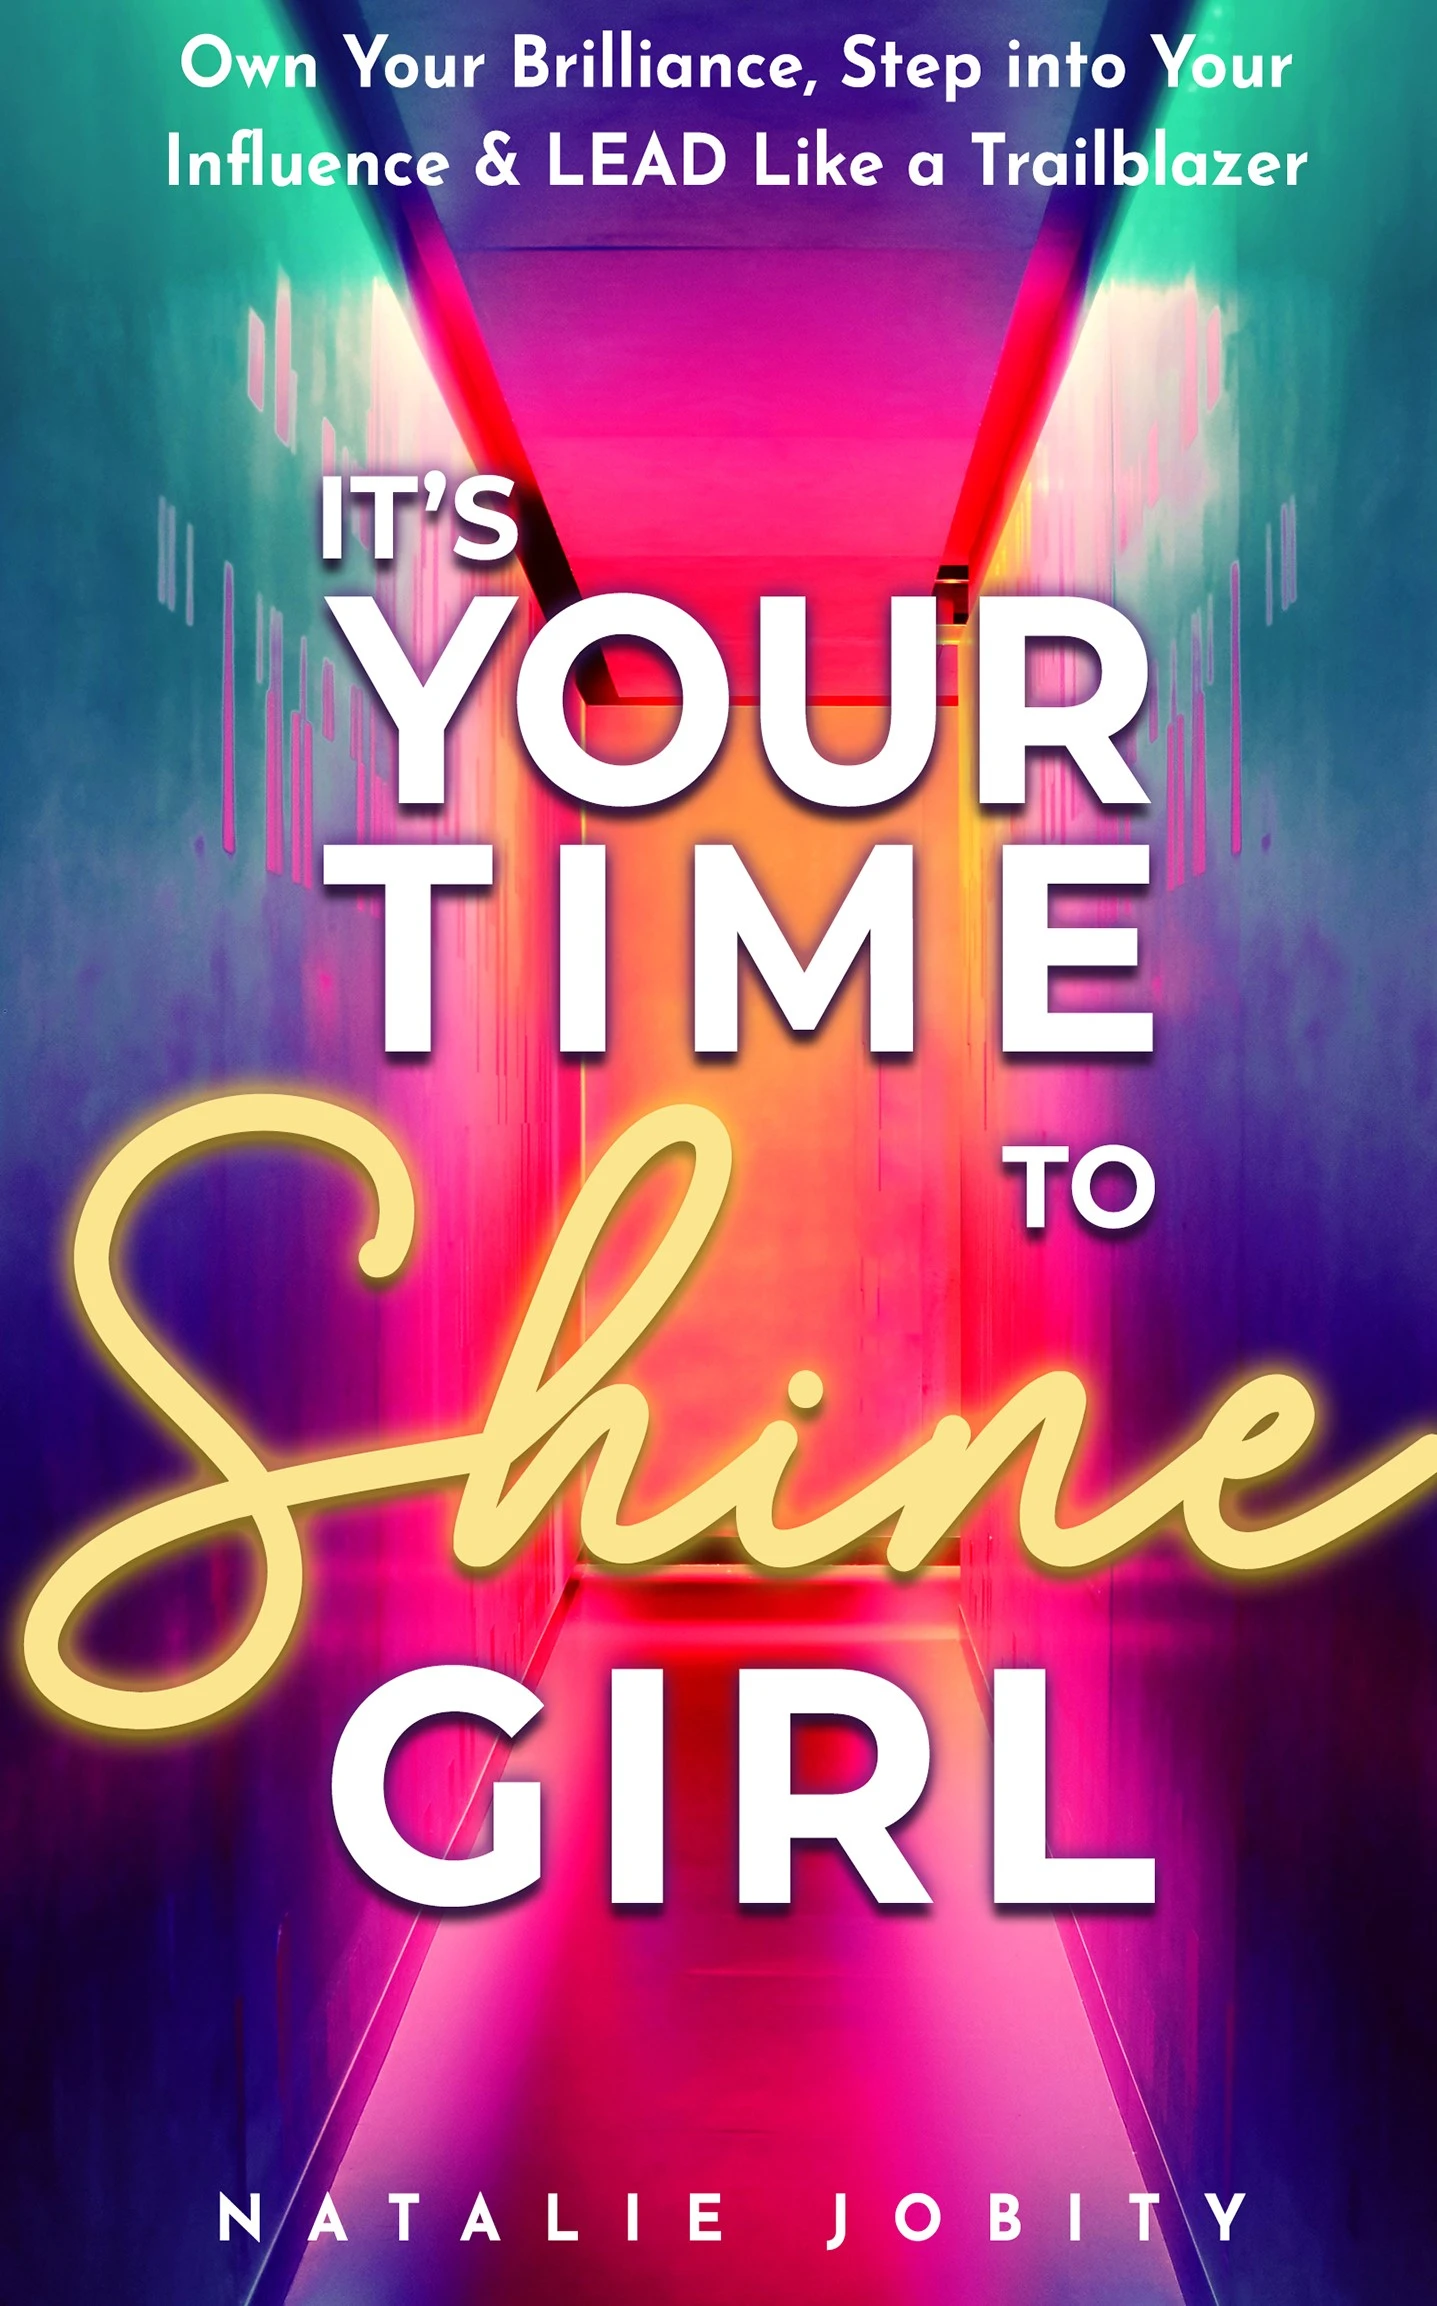 It’s Your Time to Shine Girl: Own Your Brilliance, Step into Your Influence, & Lead Like a Trailblazer